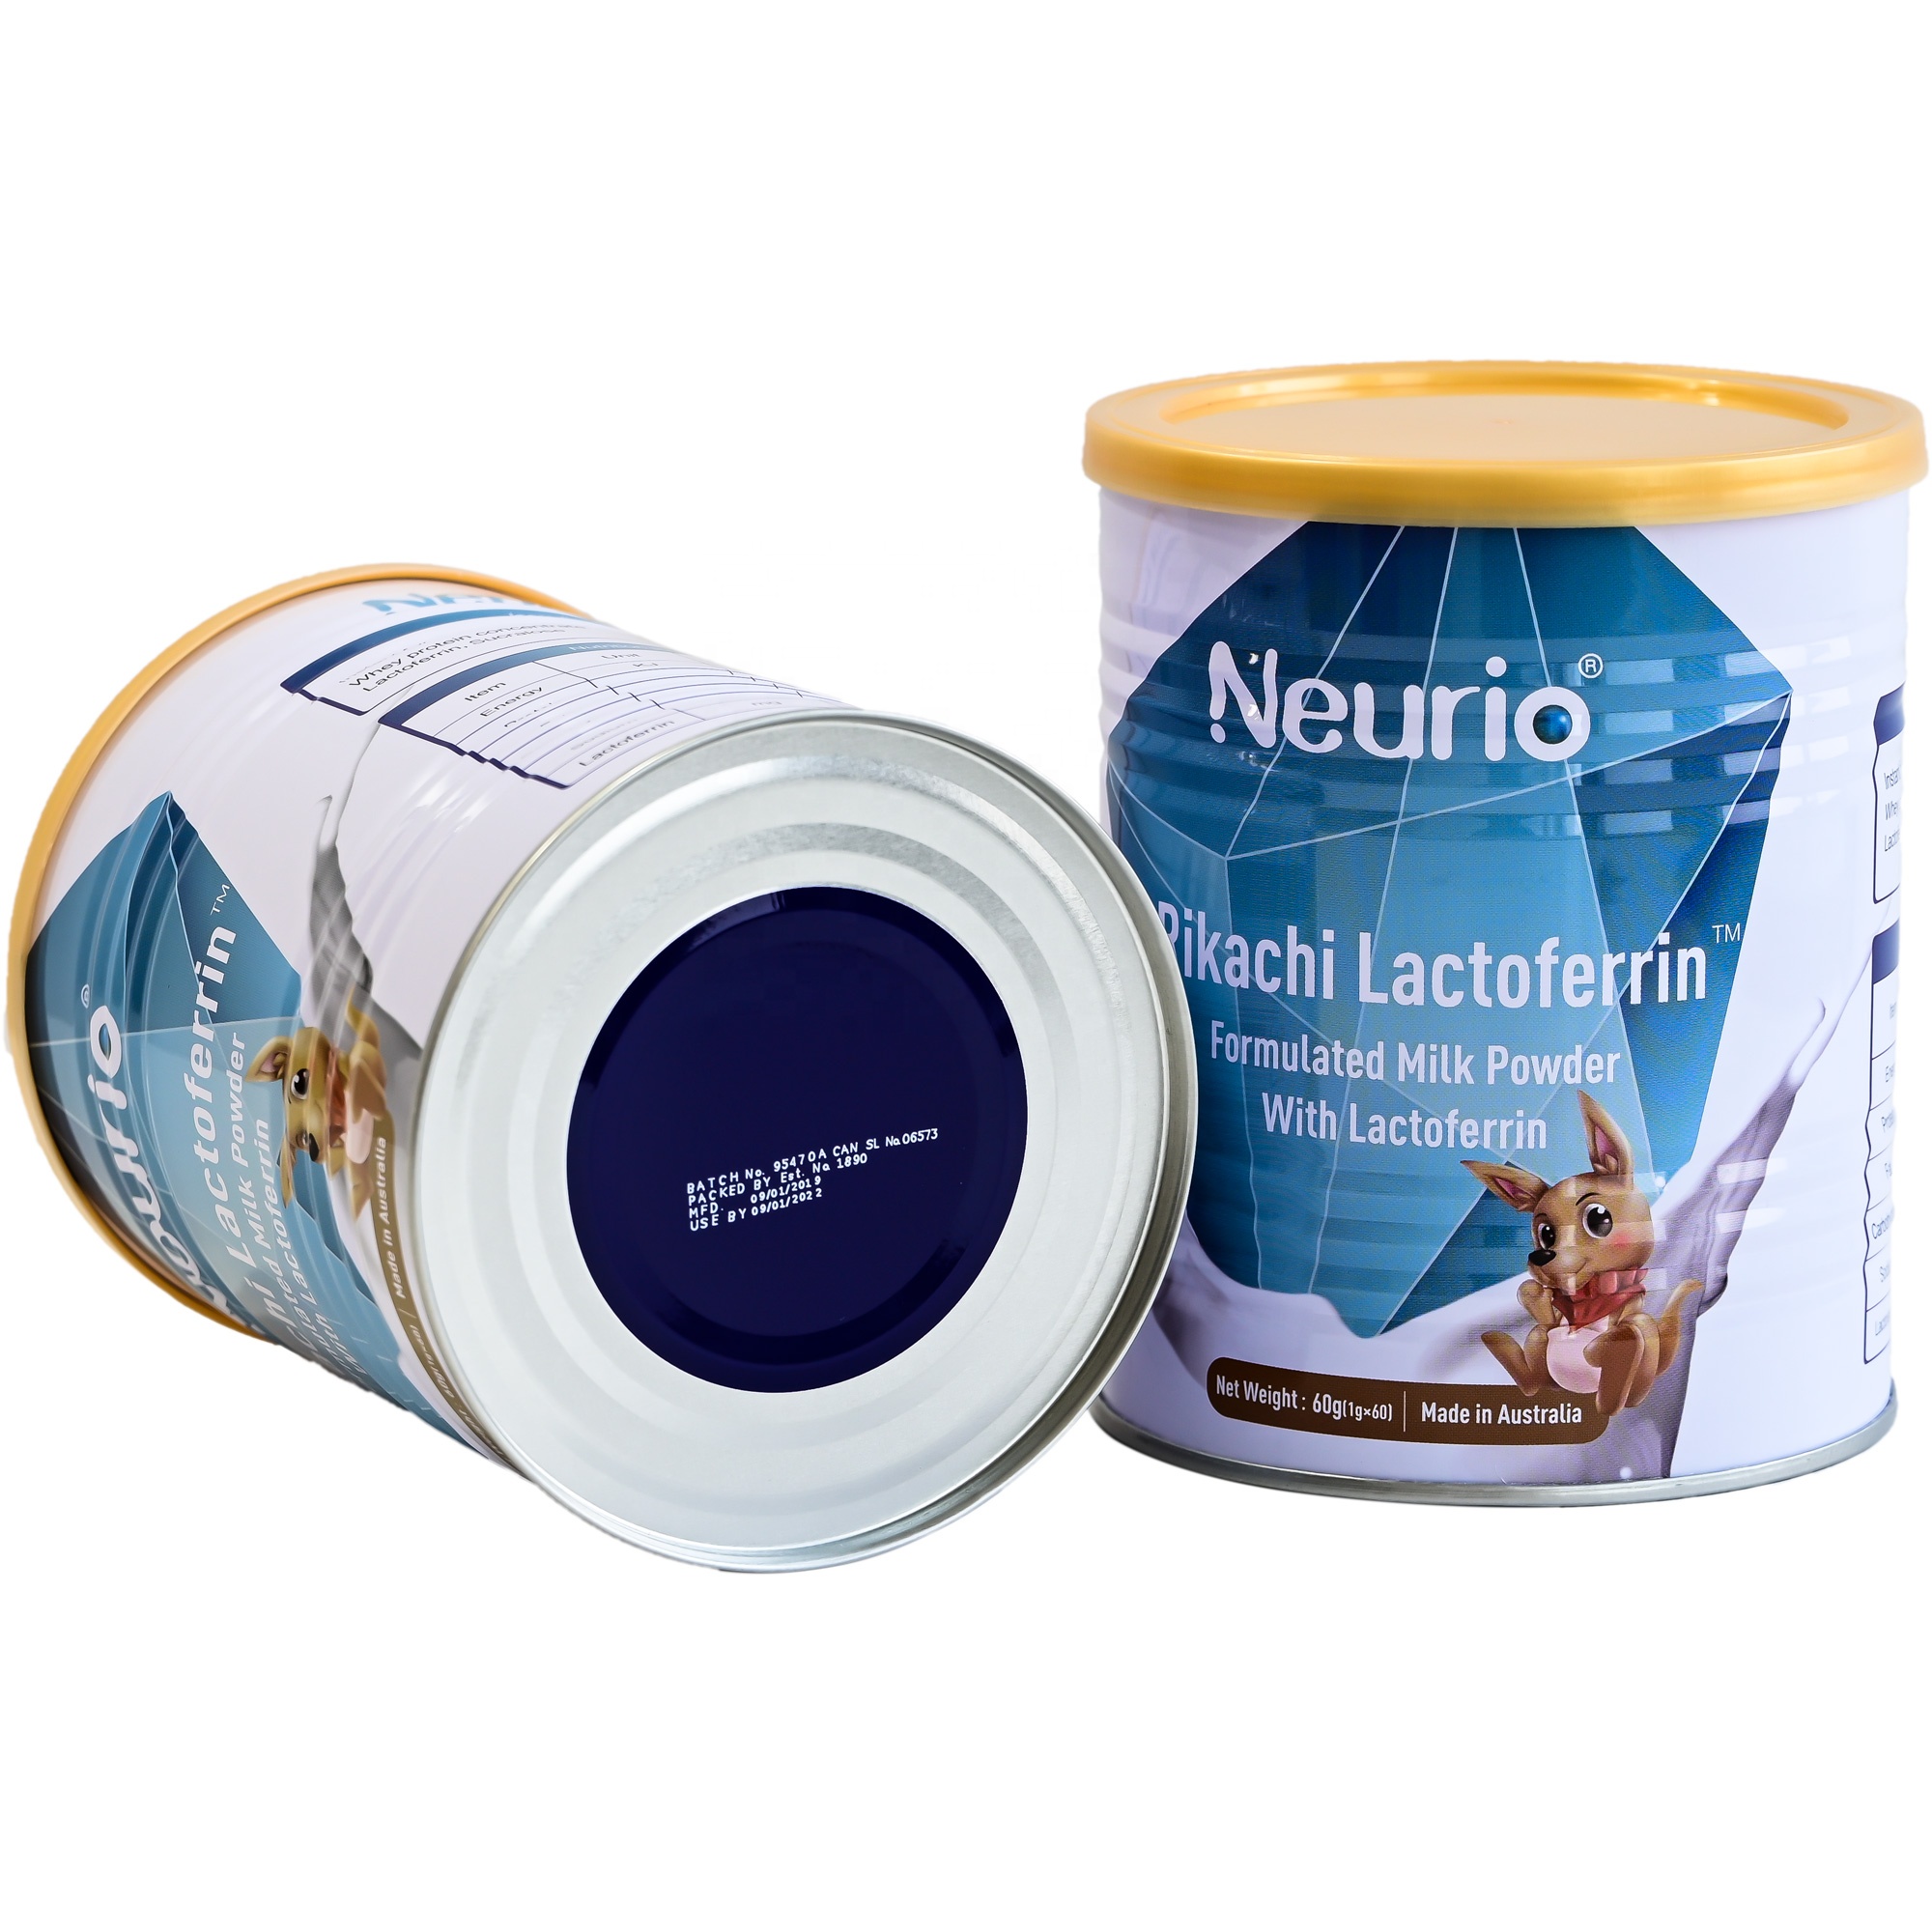 Manufactured for easy carrying independent sachets from Australia lactoferrin baby formula milk powder